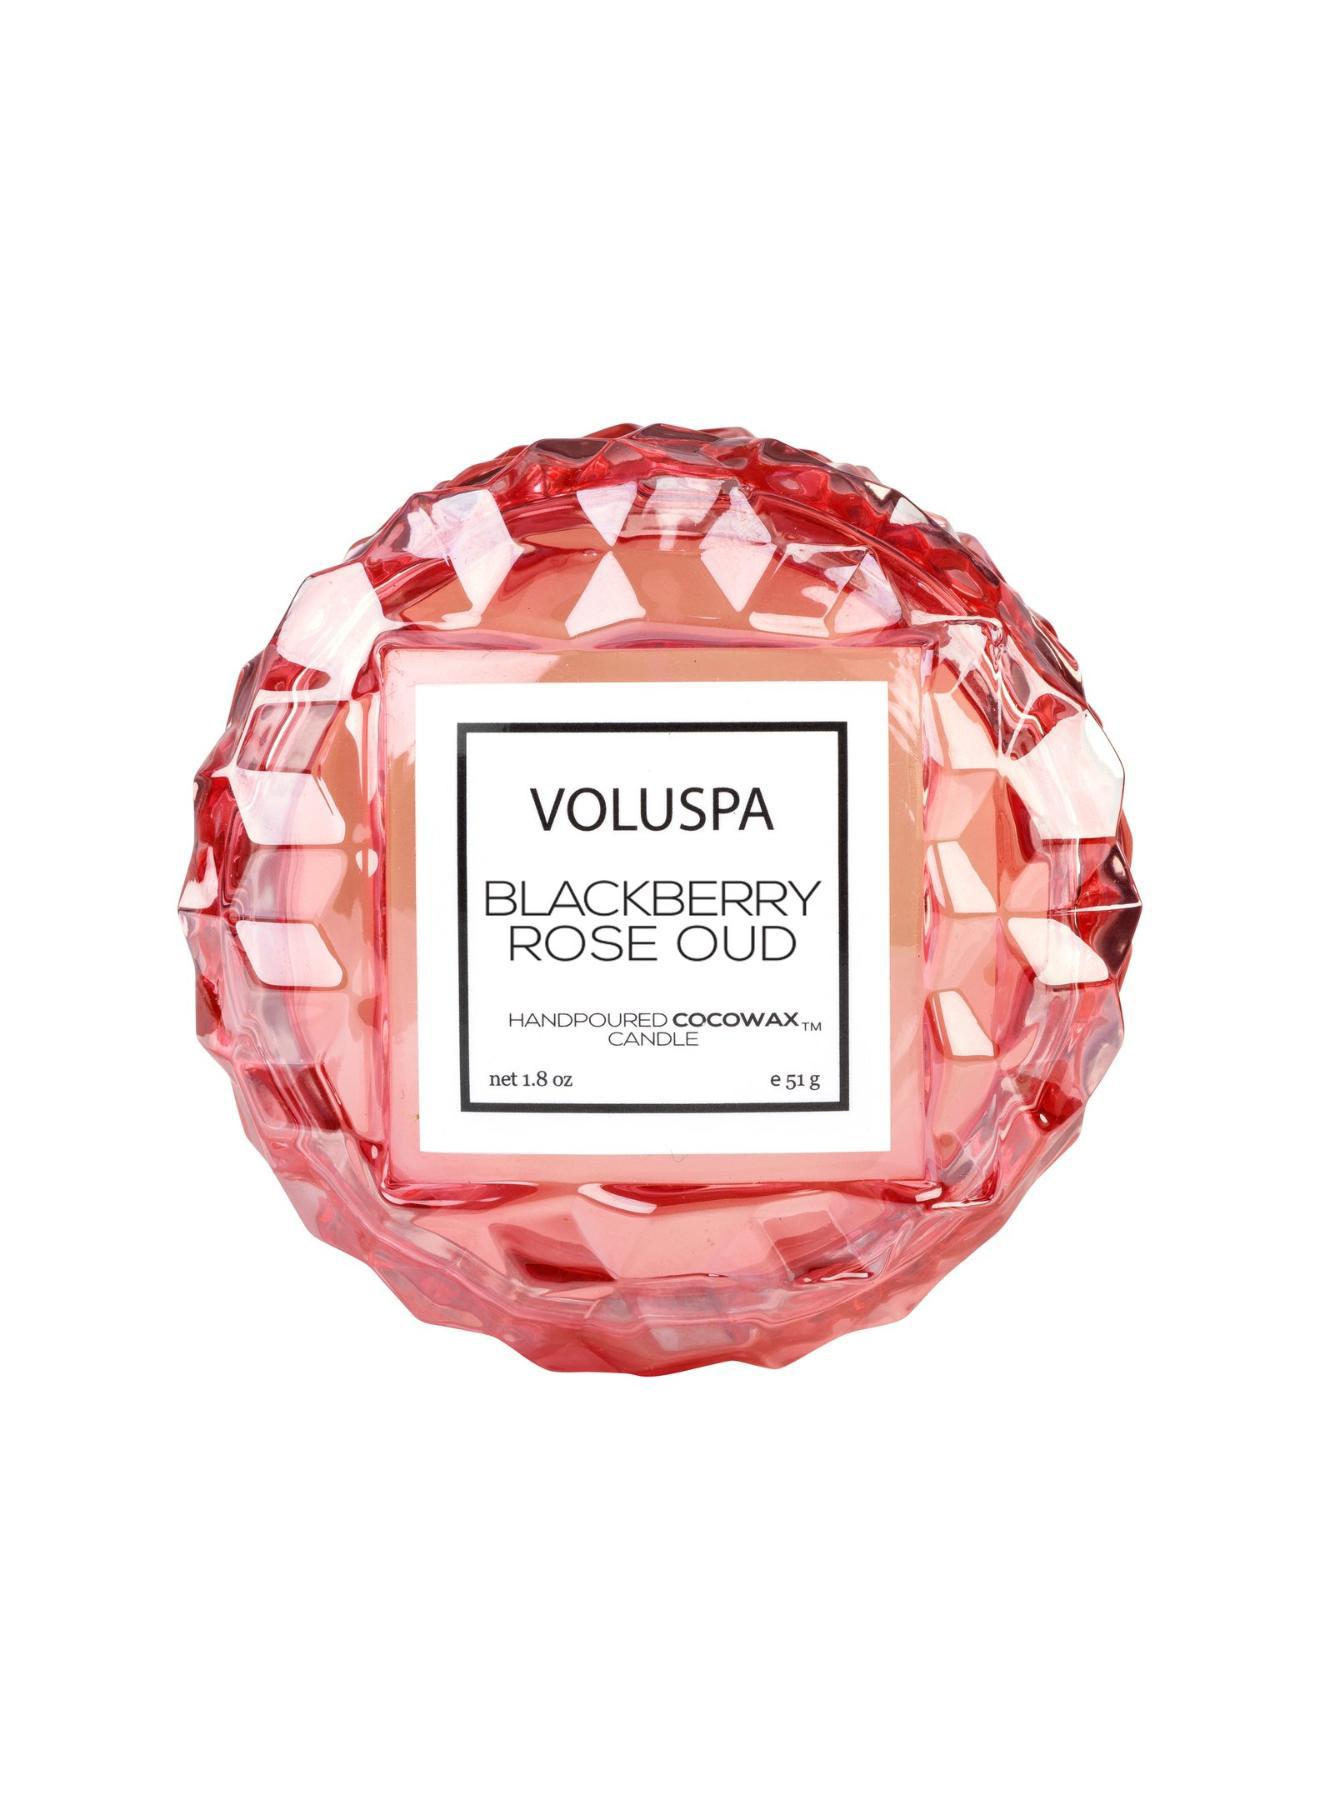 Blackberry rose oud macaron candle - 1